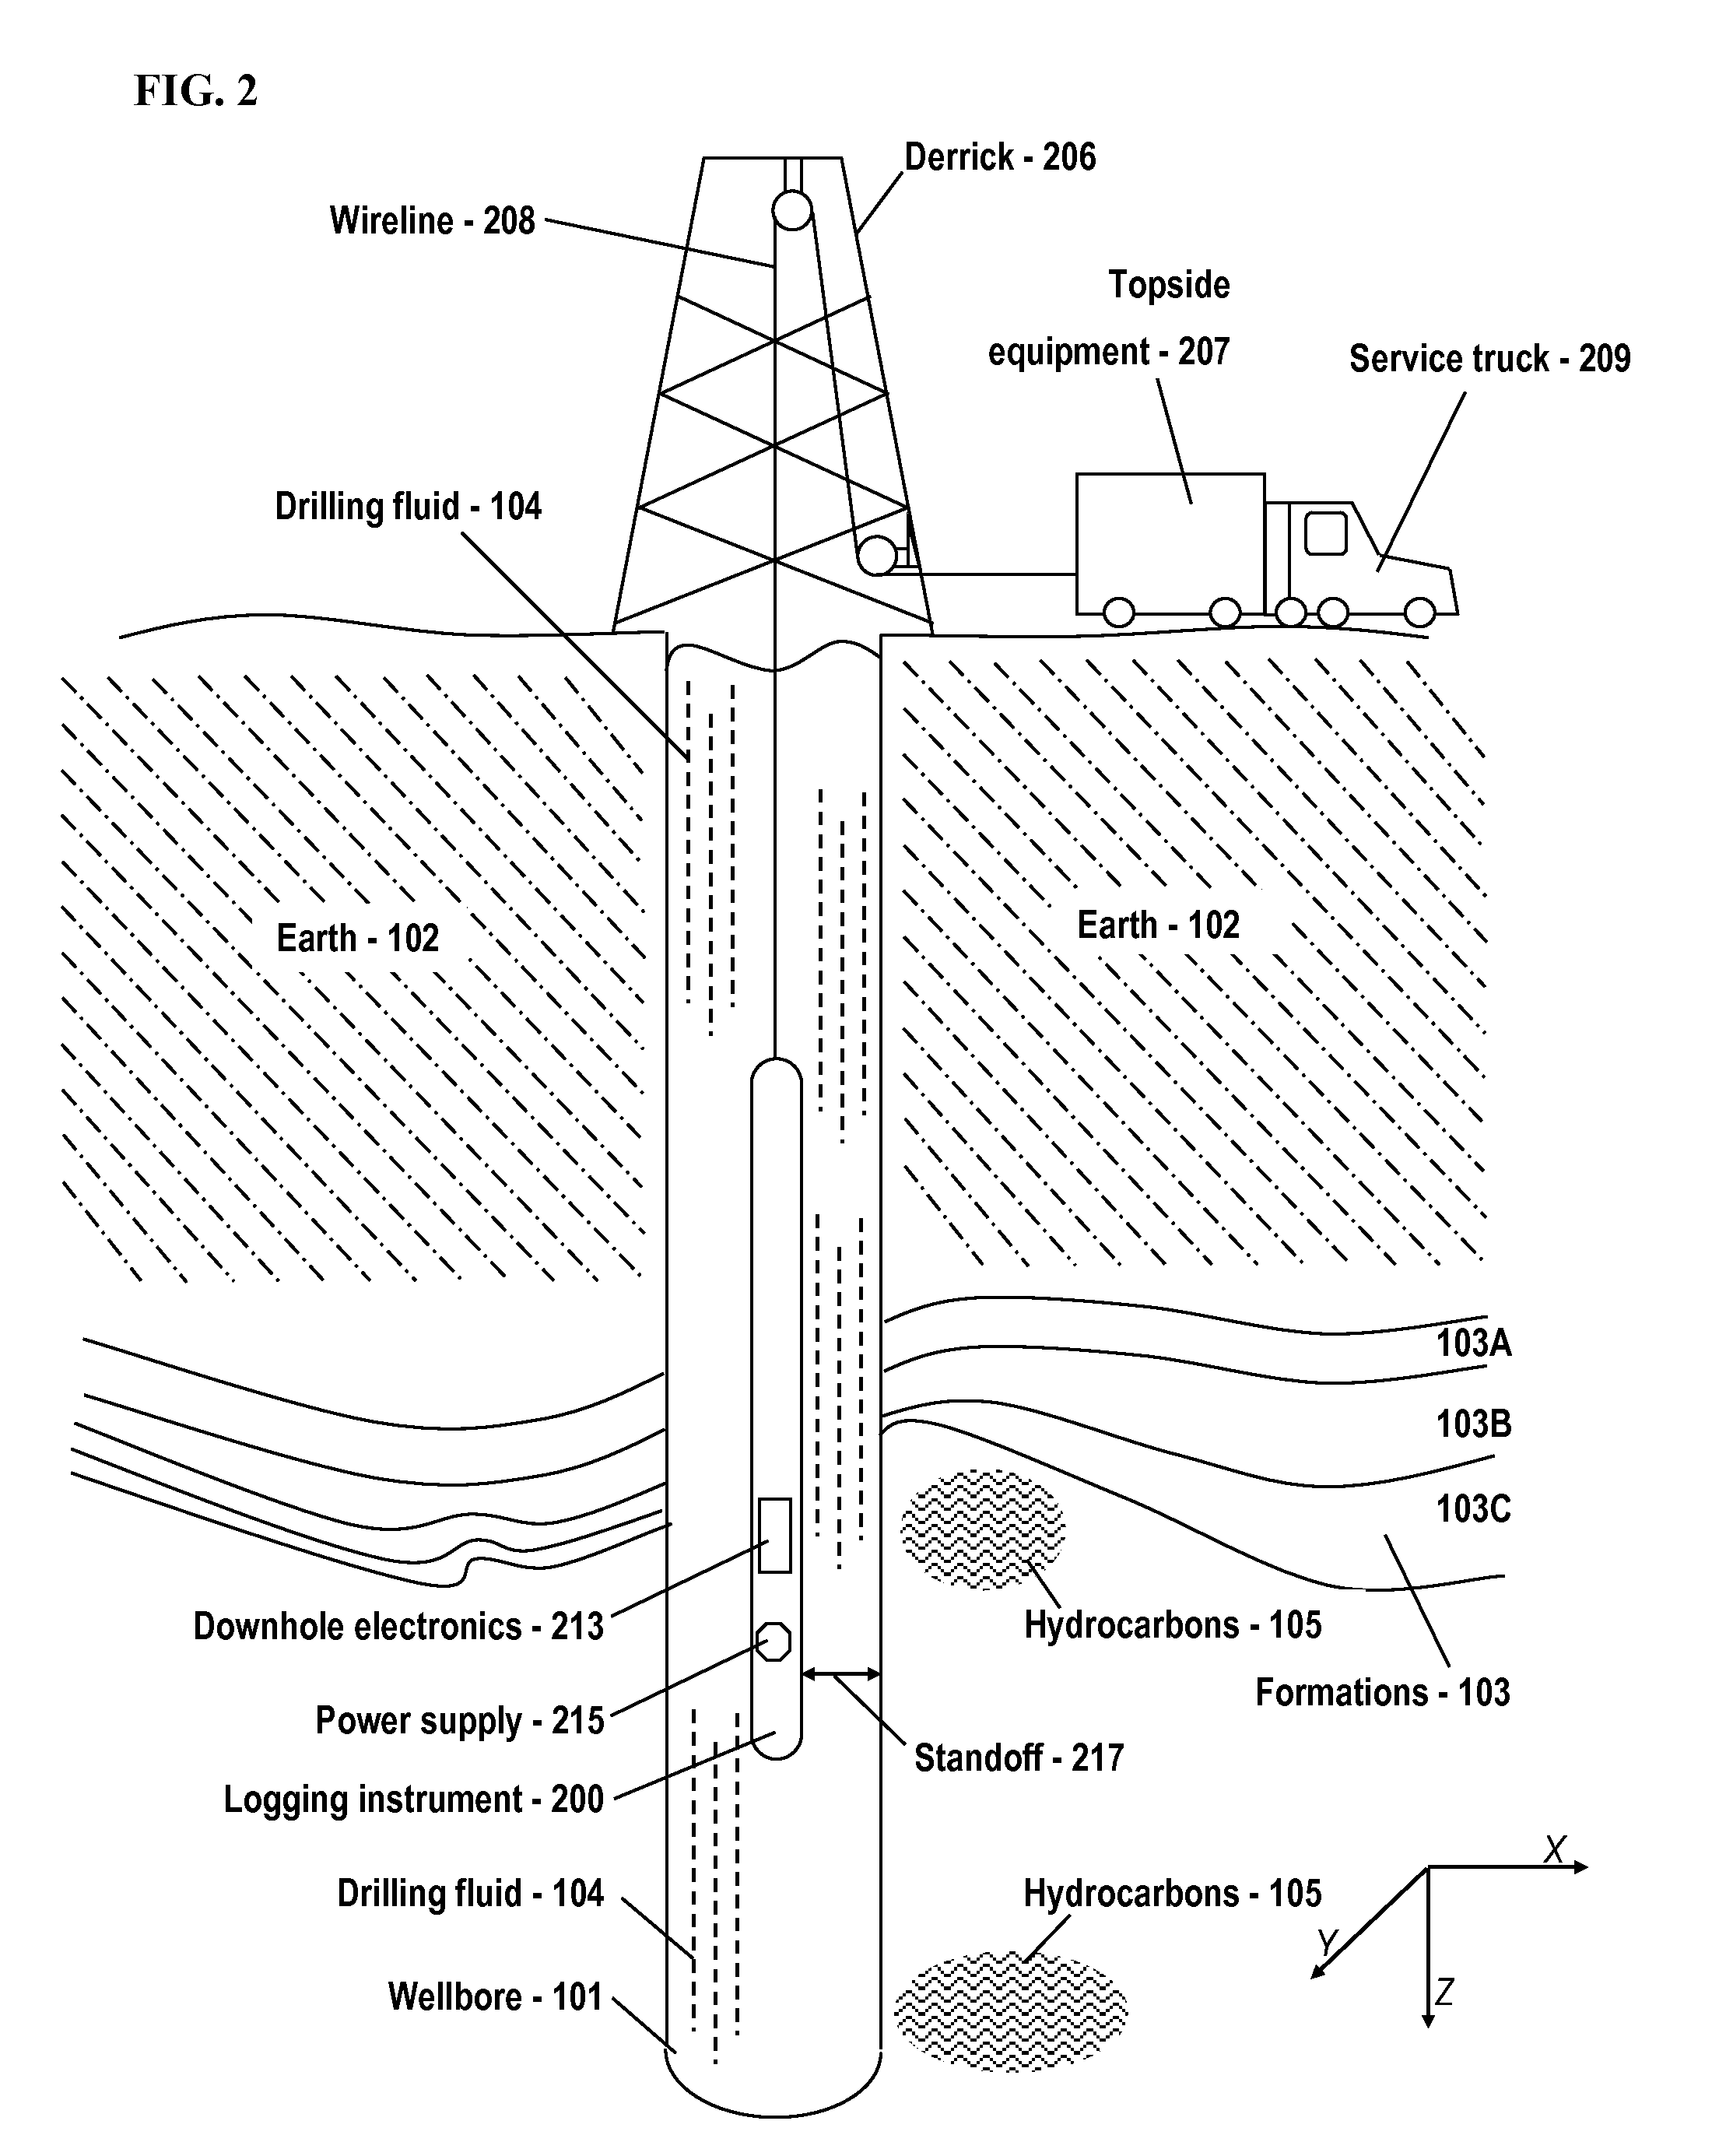 Power system for downhole toolstring